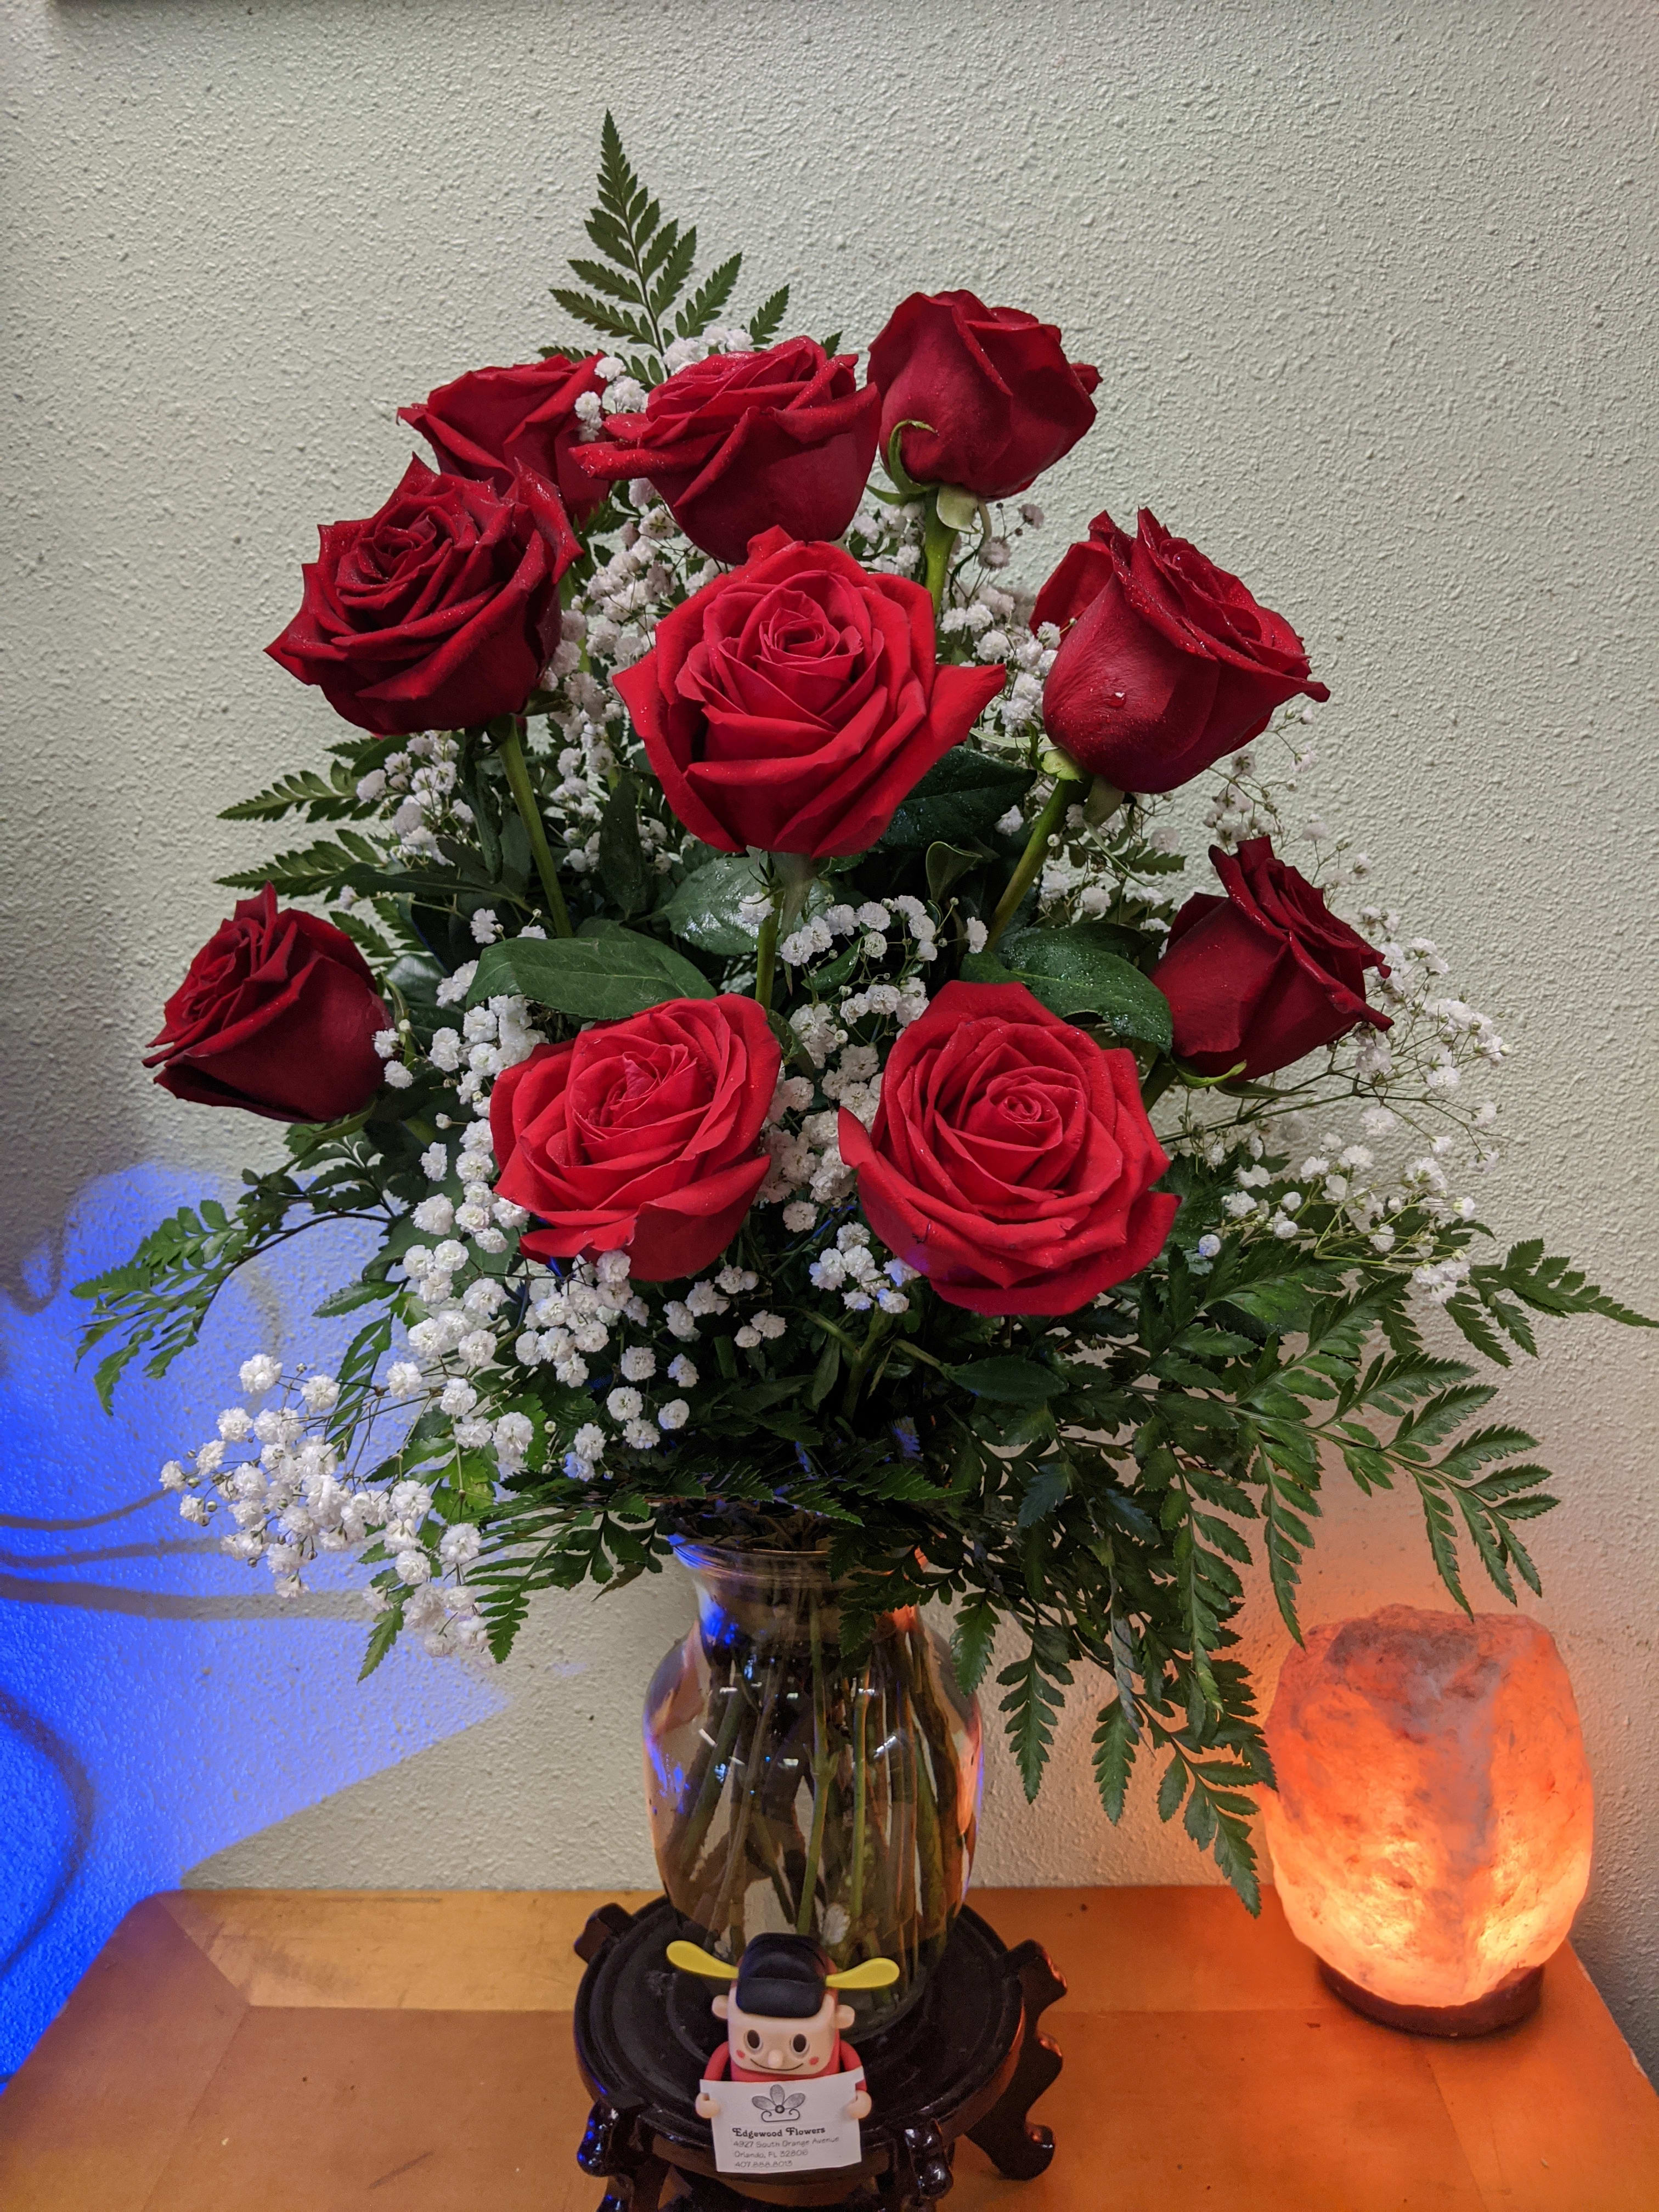 The Red Rose Bouquet - The Red Rose Bouquet offers a symbol of lasting love and undying affection in this time of grief and loss. Rich red roses are perfectly arranged with seeded eucalyptus in a classic clear glass vase to create a bouquet that expresses your most heartfelt sympathies.